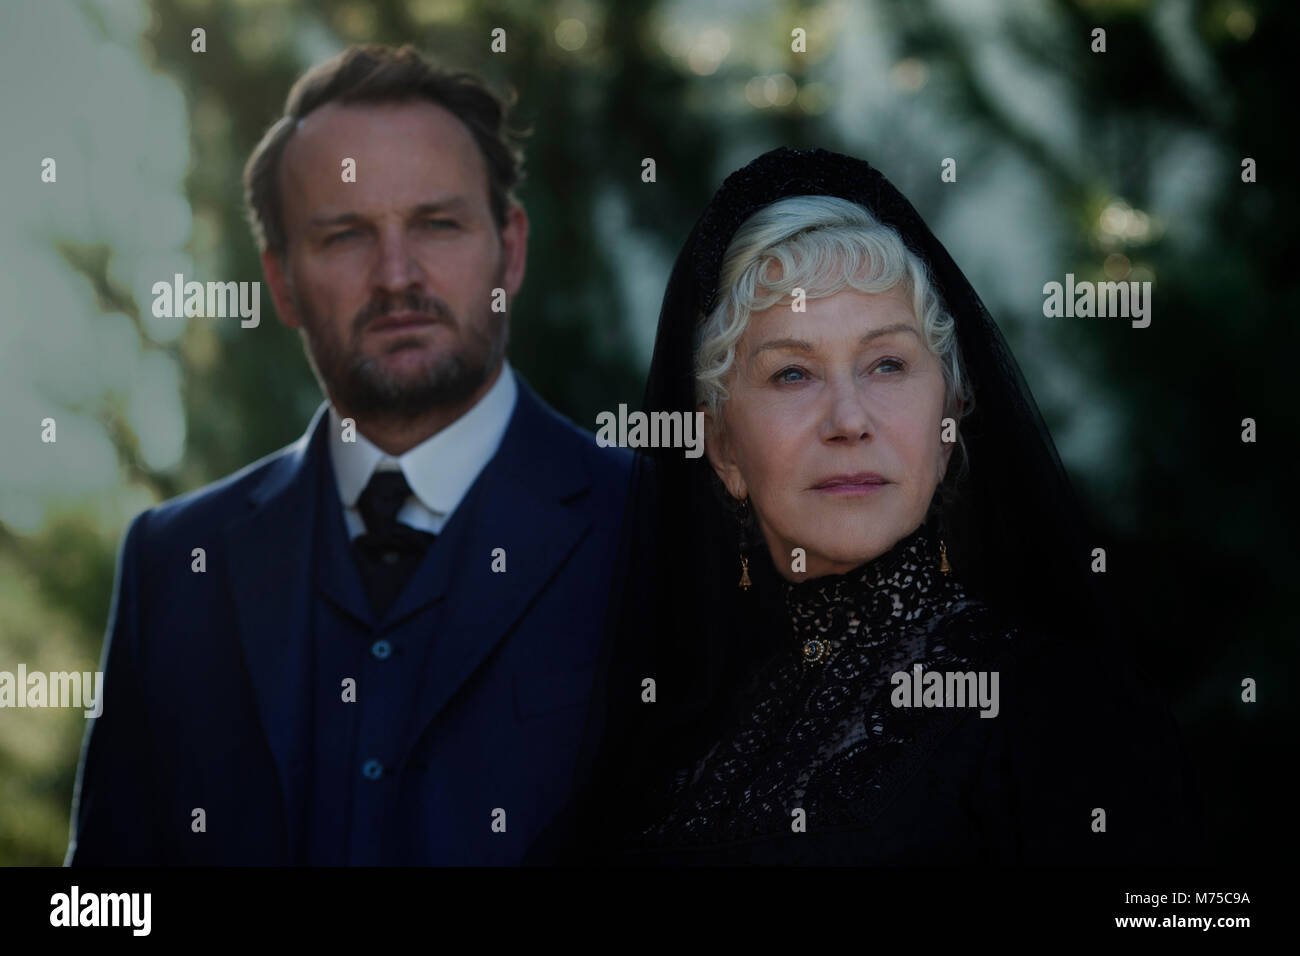 RELEASE DATE: February 2, 2018 TITLE: Winchester STUDIO: CBS Films DIRECTOR: Michael Spierig PLOT: Eccentric firearm heiress believes she is haunted by the souls of people killed by the Winchester repeating rifle. STARRING: HELEN MIRREN as Sarah Winchester, JASON CLARKE as Eric Price. (Credit Image: © CBS Films/Entertainment Pictures) Stock Photo